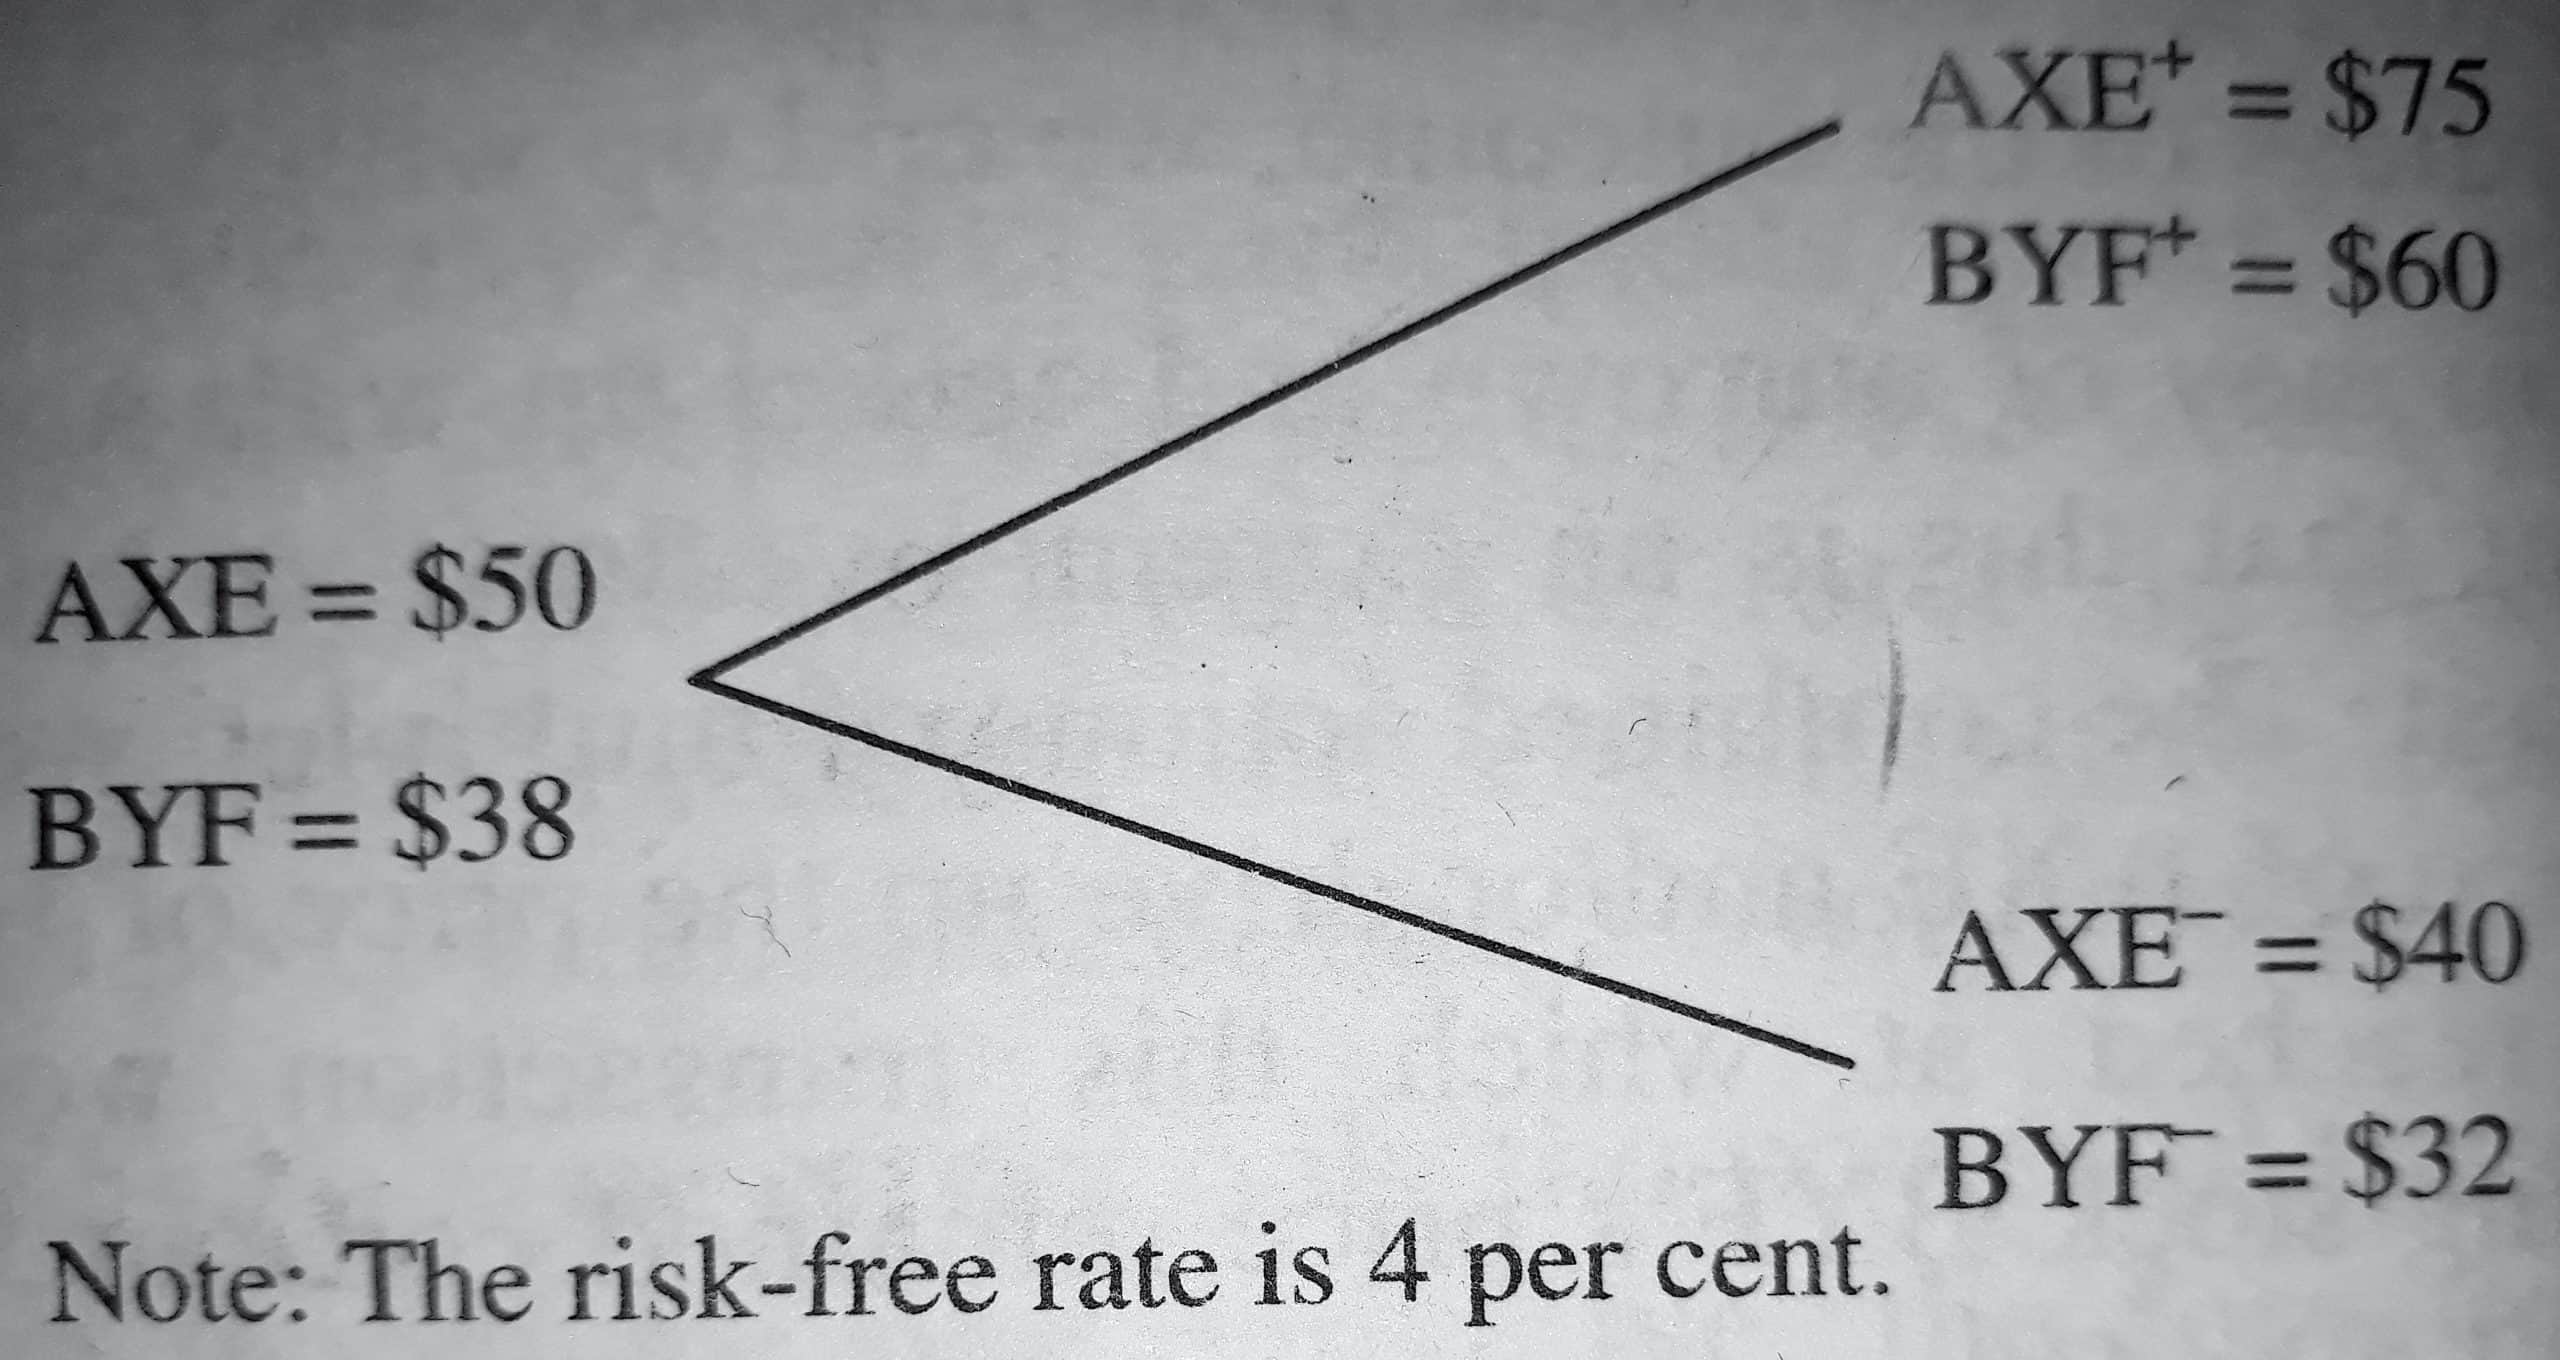 Arbitrage Opportunity with Stock AXE, Stock BYF, and a Risk-Free Bond